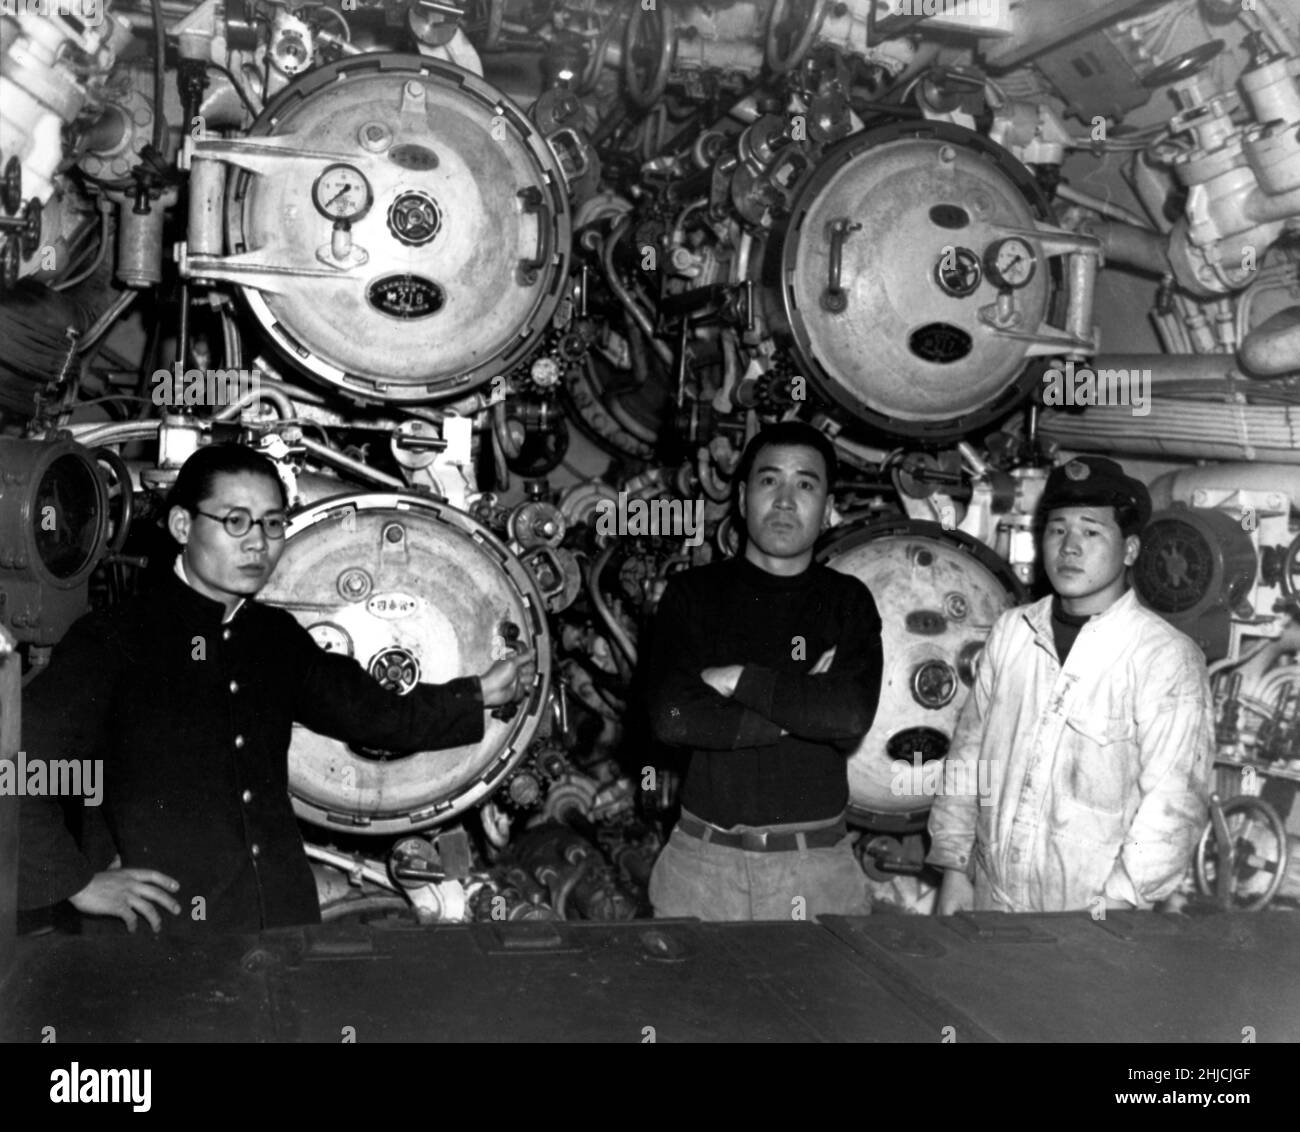 I-58 view in the forward torpedo room, showing 21-inch torpedo tubes and three crew members. Taken at Sasebo, Japan, January 28, 1946. I-58 was a Japanese B3 type cruiser submarine that served in the final year of WWII. Her most significant success was USS Indianapolis, sunk with conventional torpedoes July 30, 1945. The submarine surrendered in September 1945, and was later scuttled by the United States Navy. (cropped and cleaned) Stock Photo